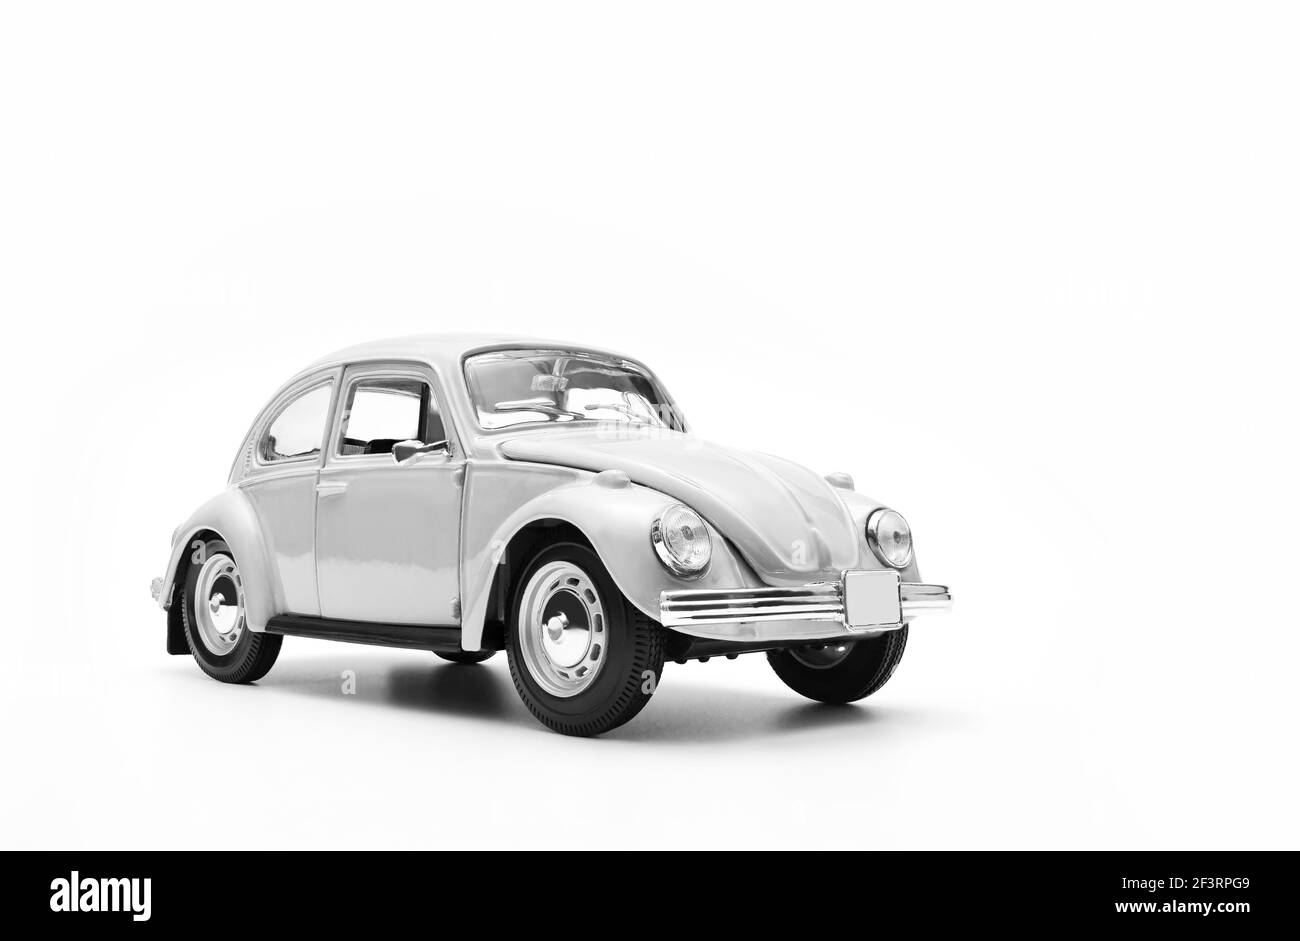 Izmir, Turkey - March 7, 2021: Front view of white colored toy model car on a white background. Stock Photo